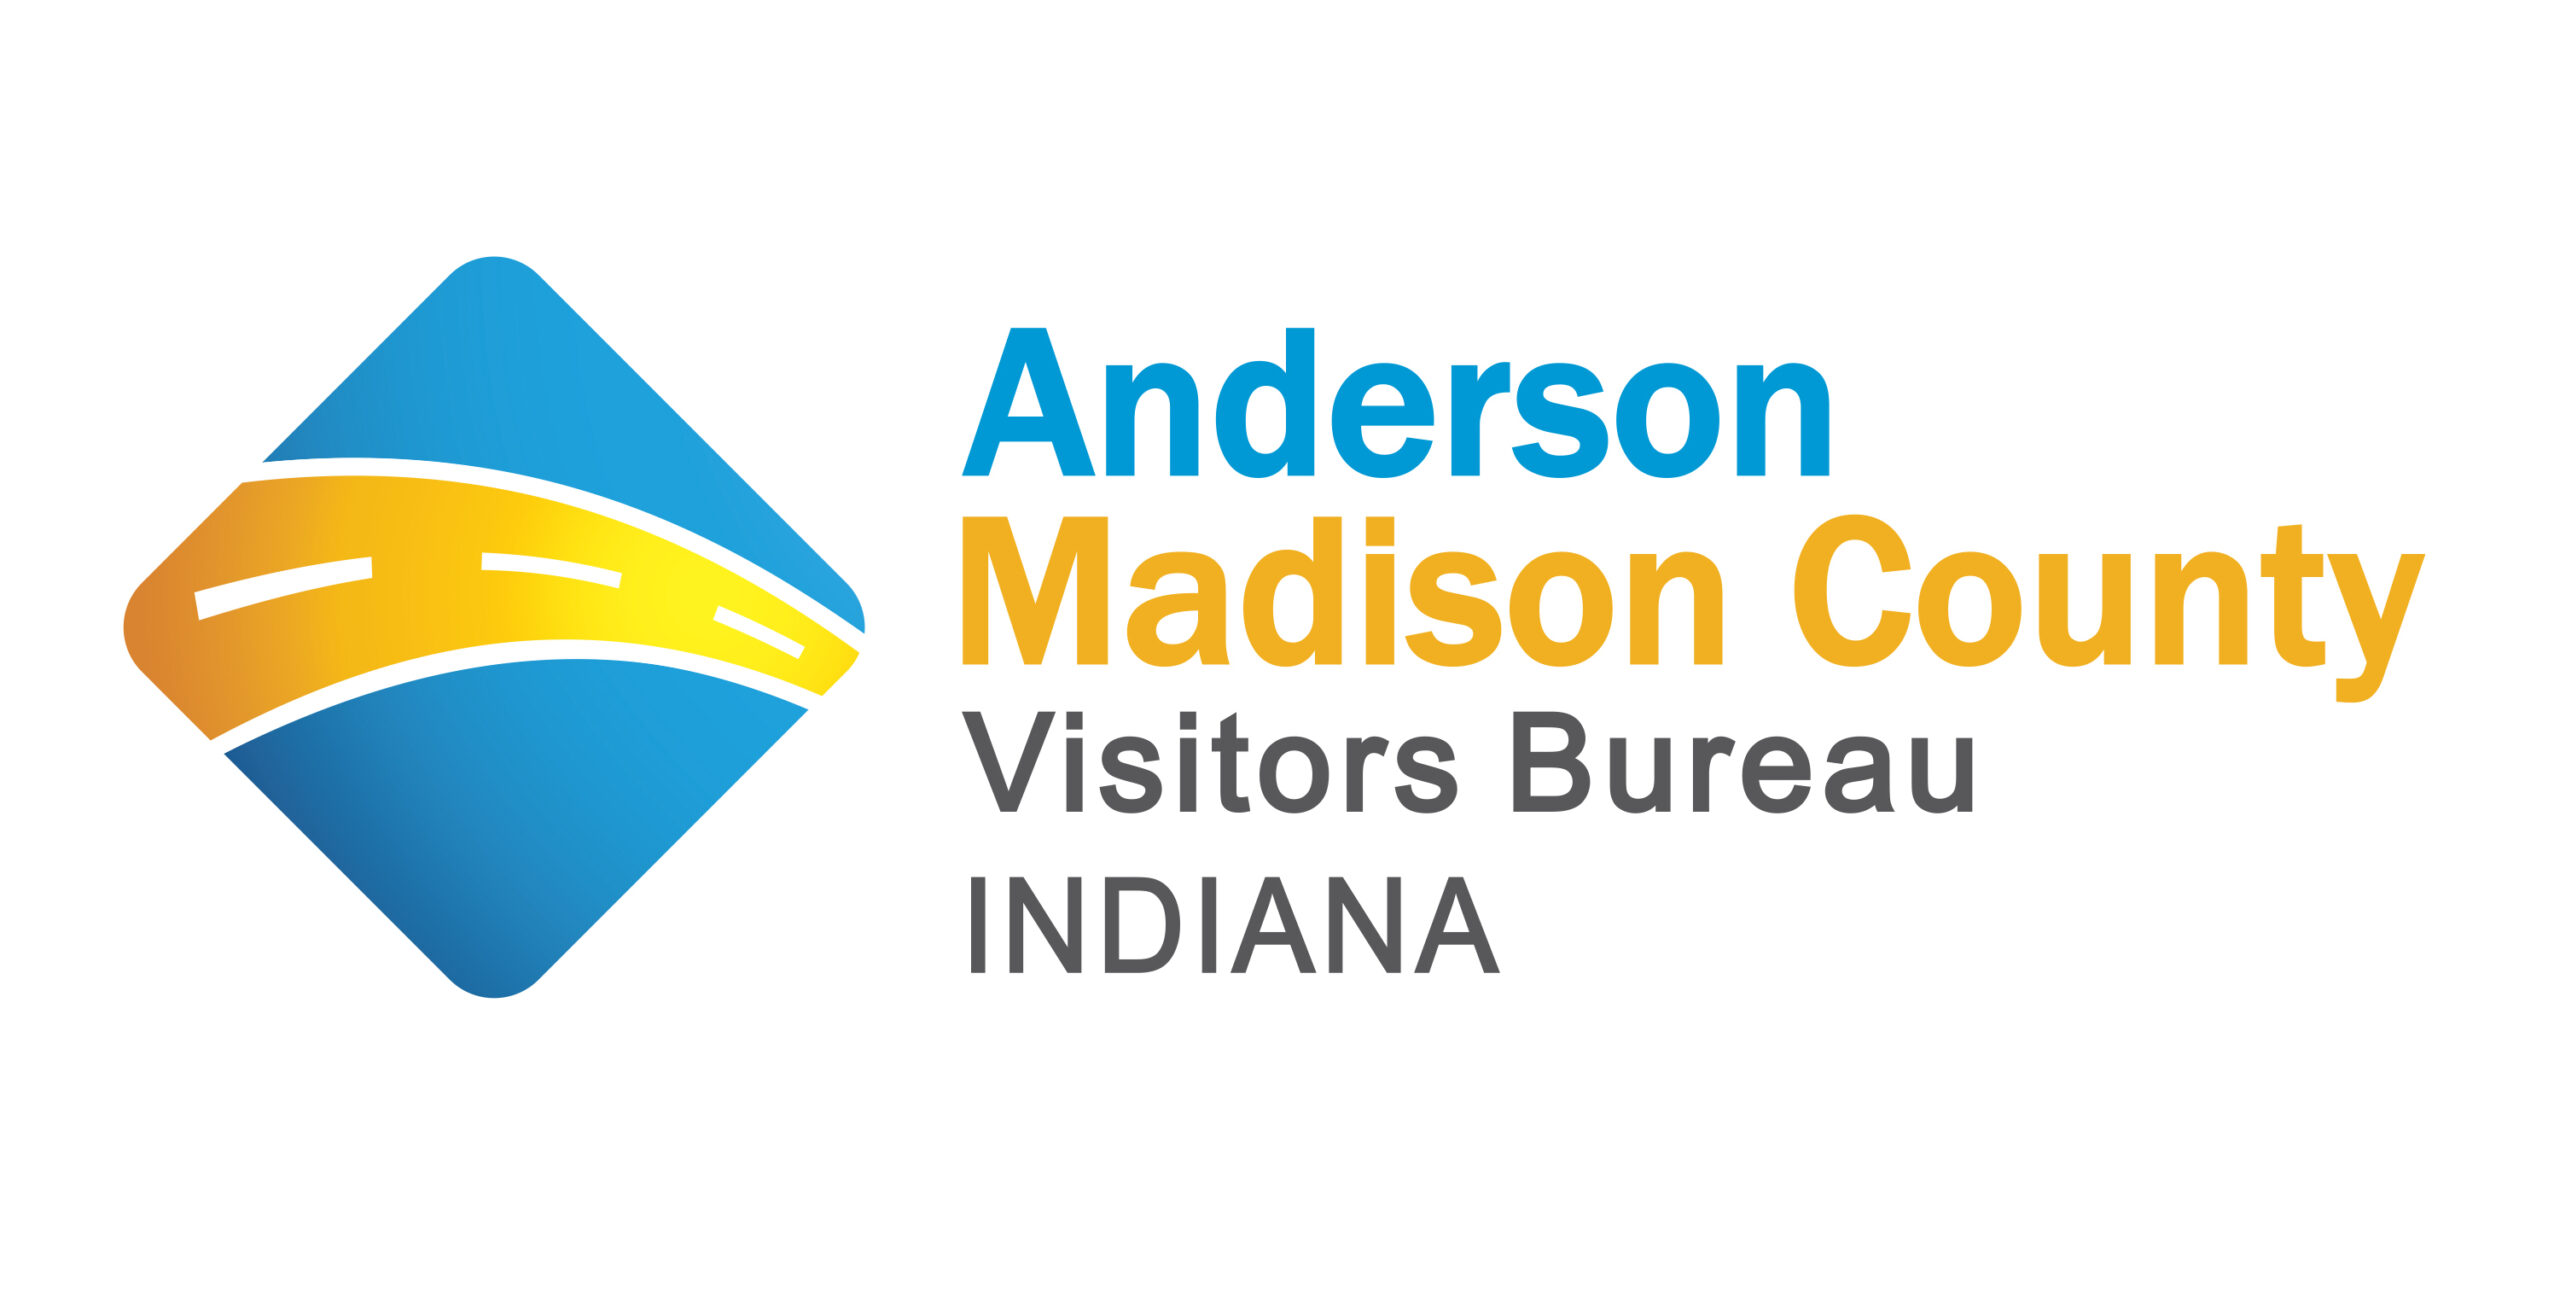 Anderson Madison County